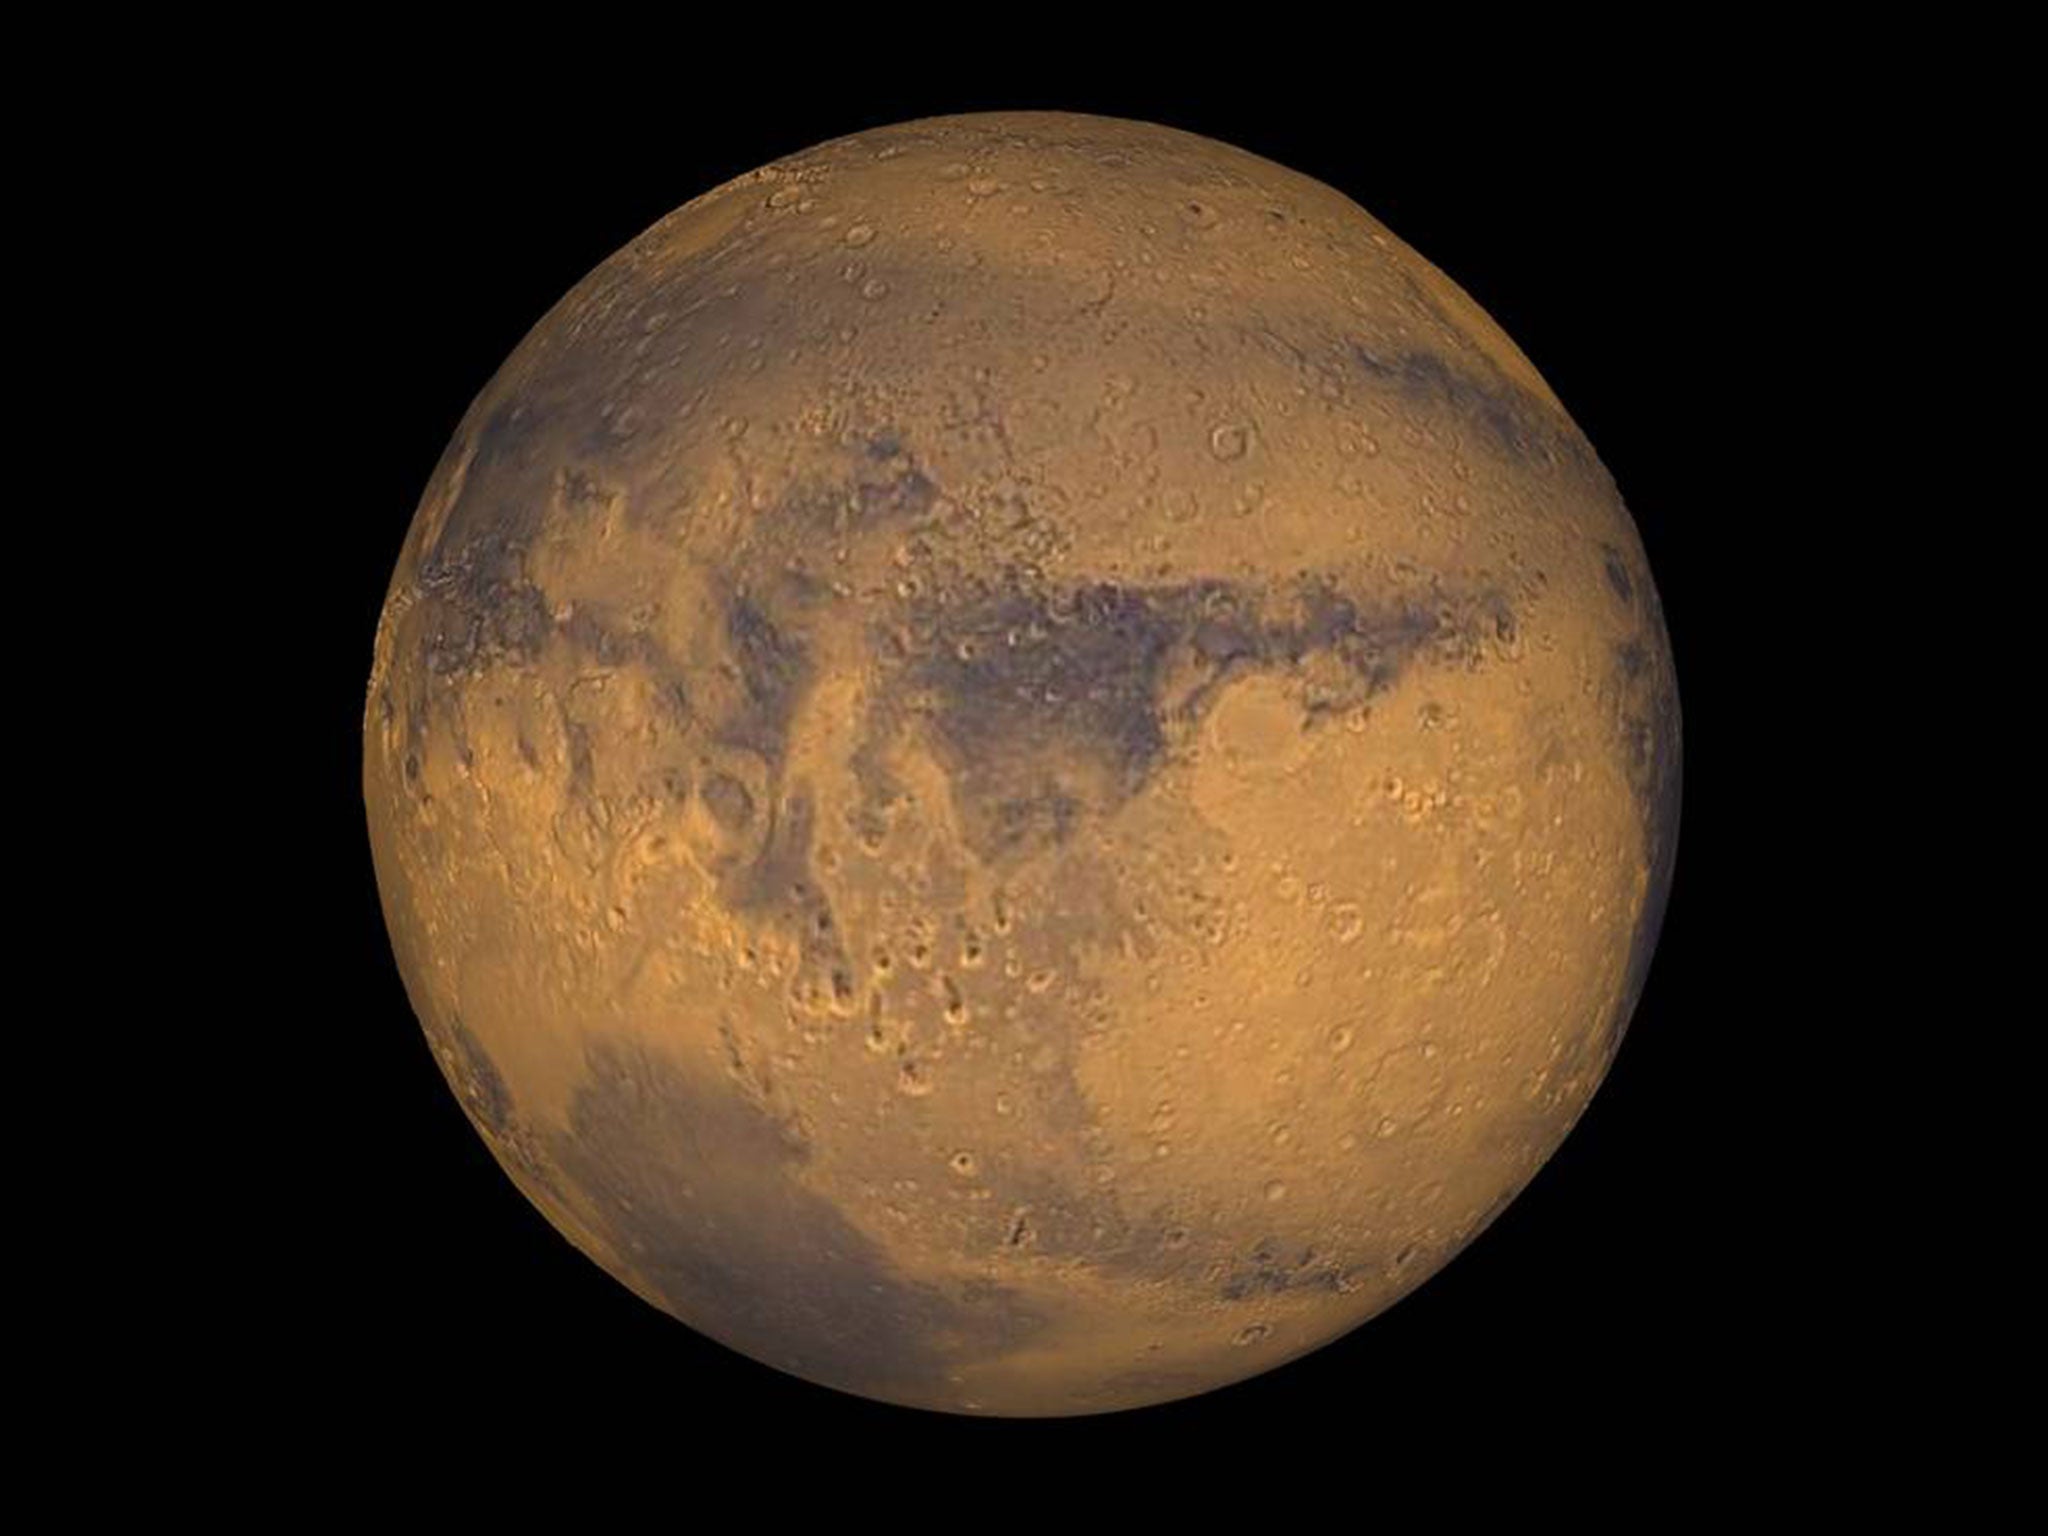 Nasa is set to make an important announcement about Mars